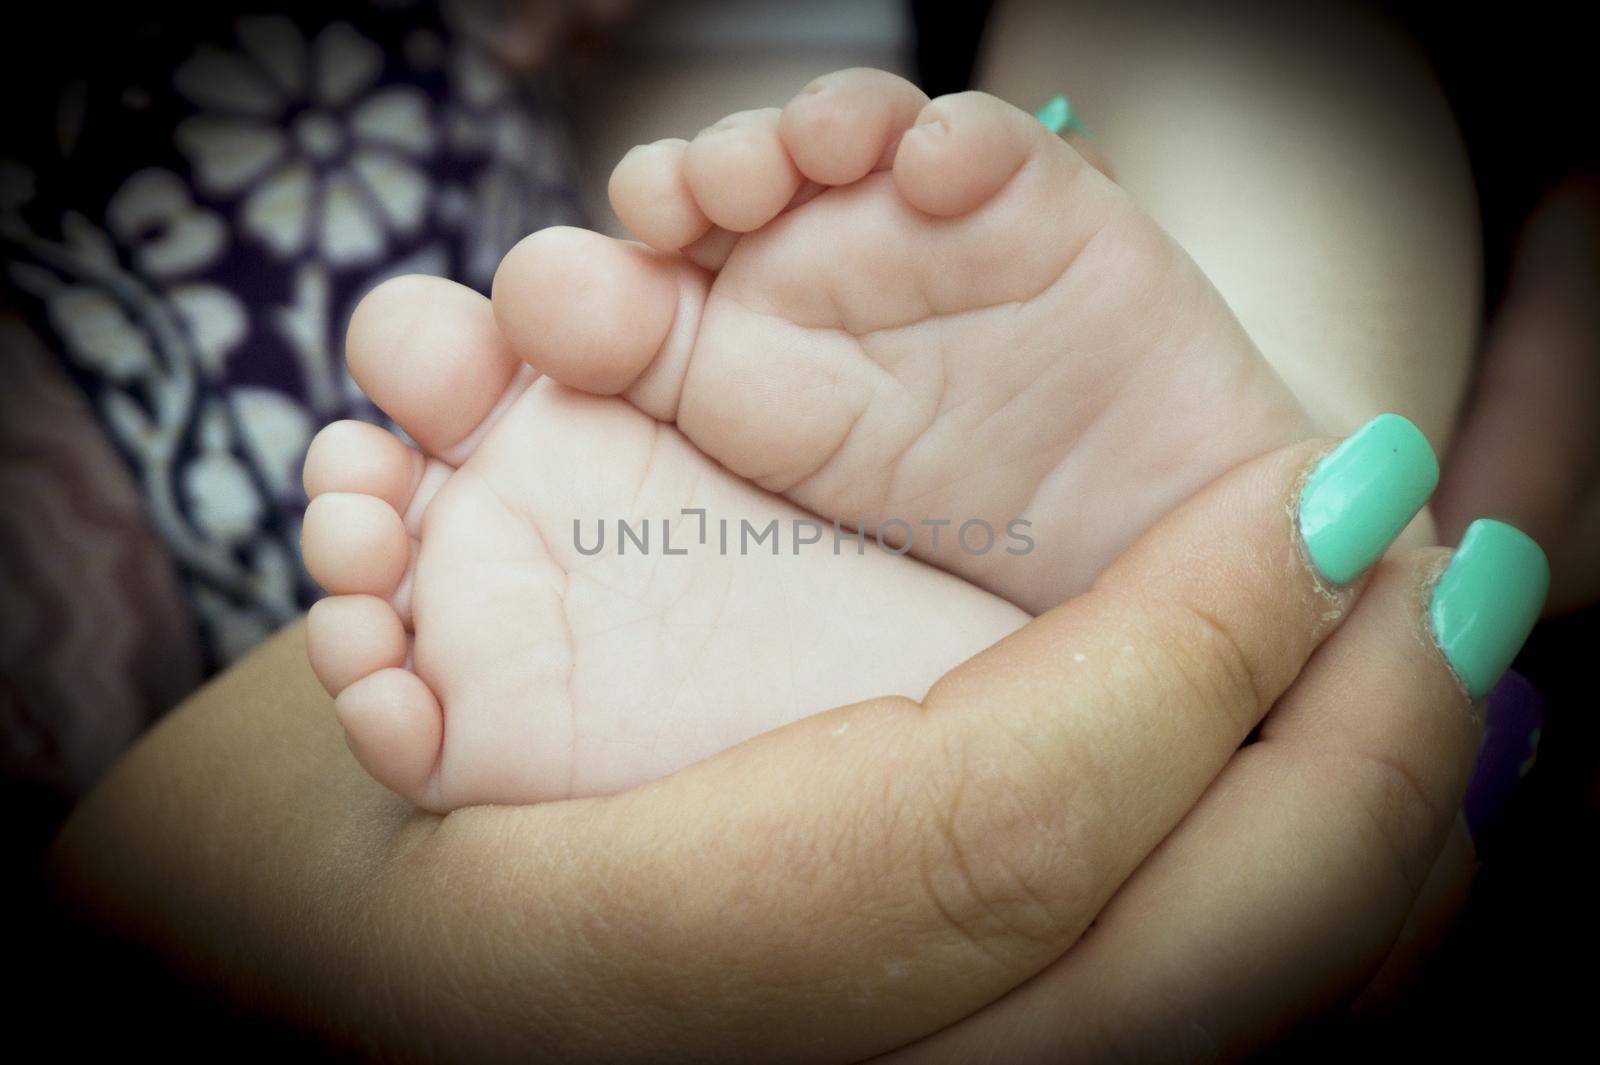 Baby feet held by mothers hand. Black background